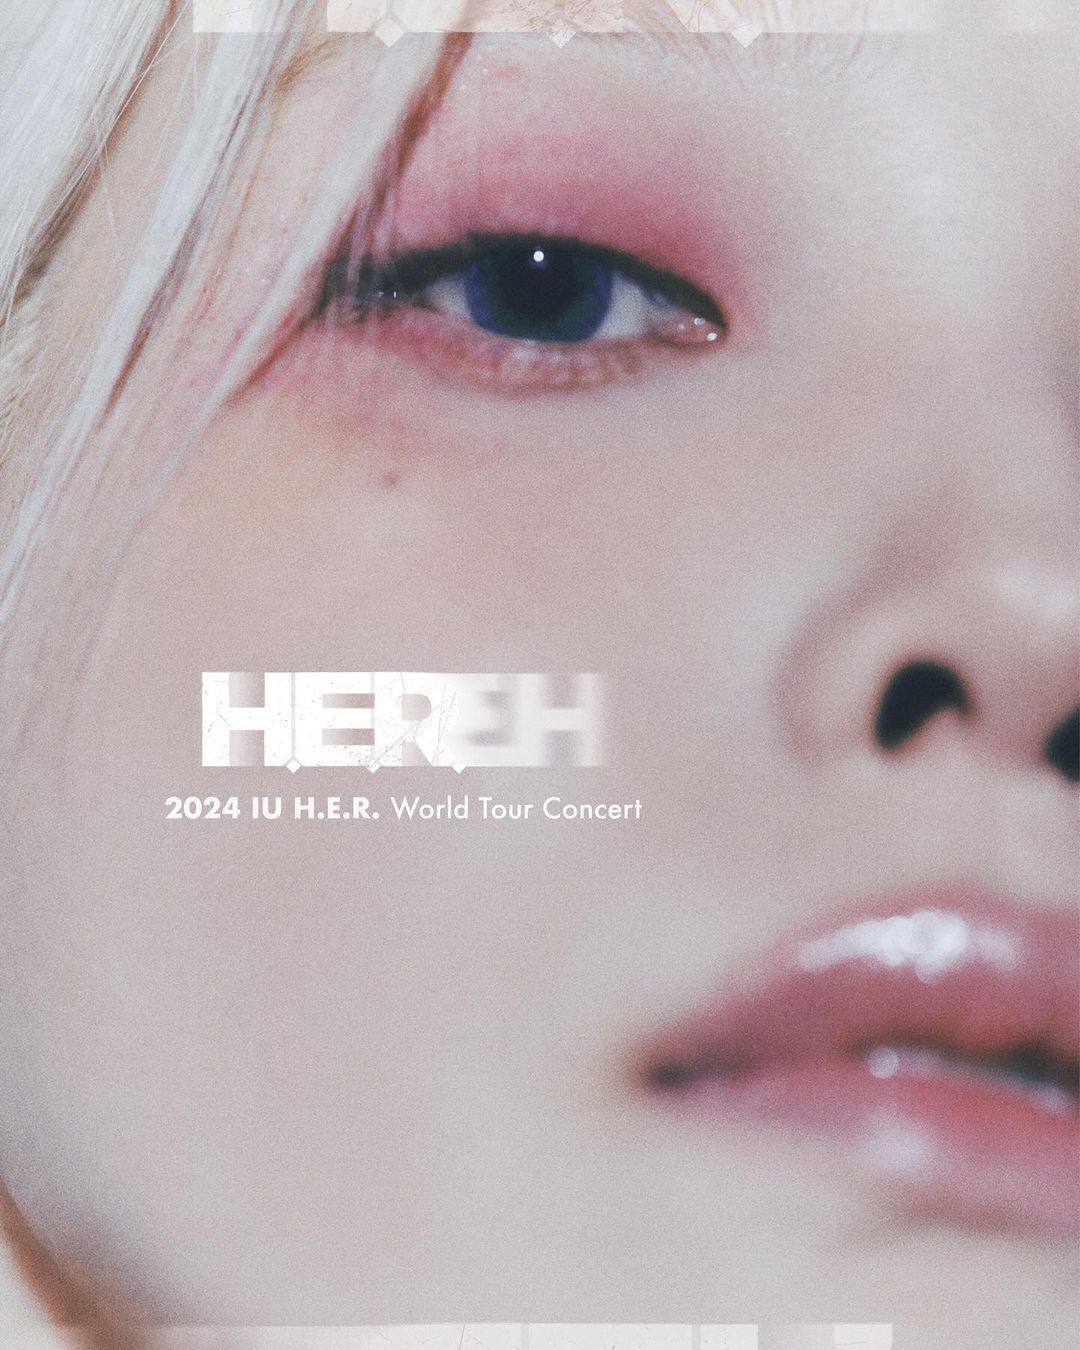 IU to hold two concerts in Singapore as part of 2024 ‘H.E.R.’ world tour